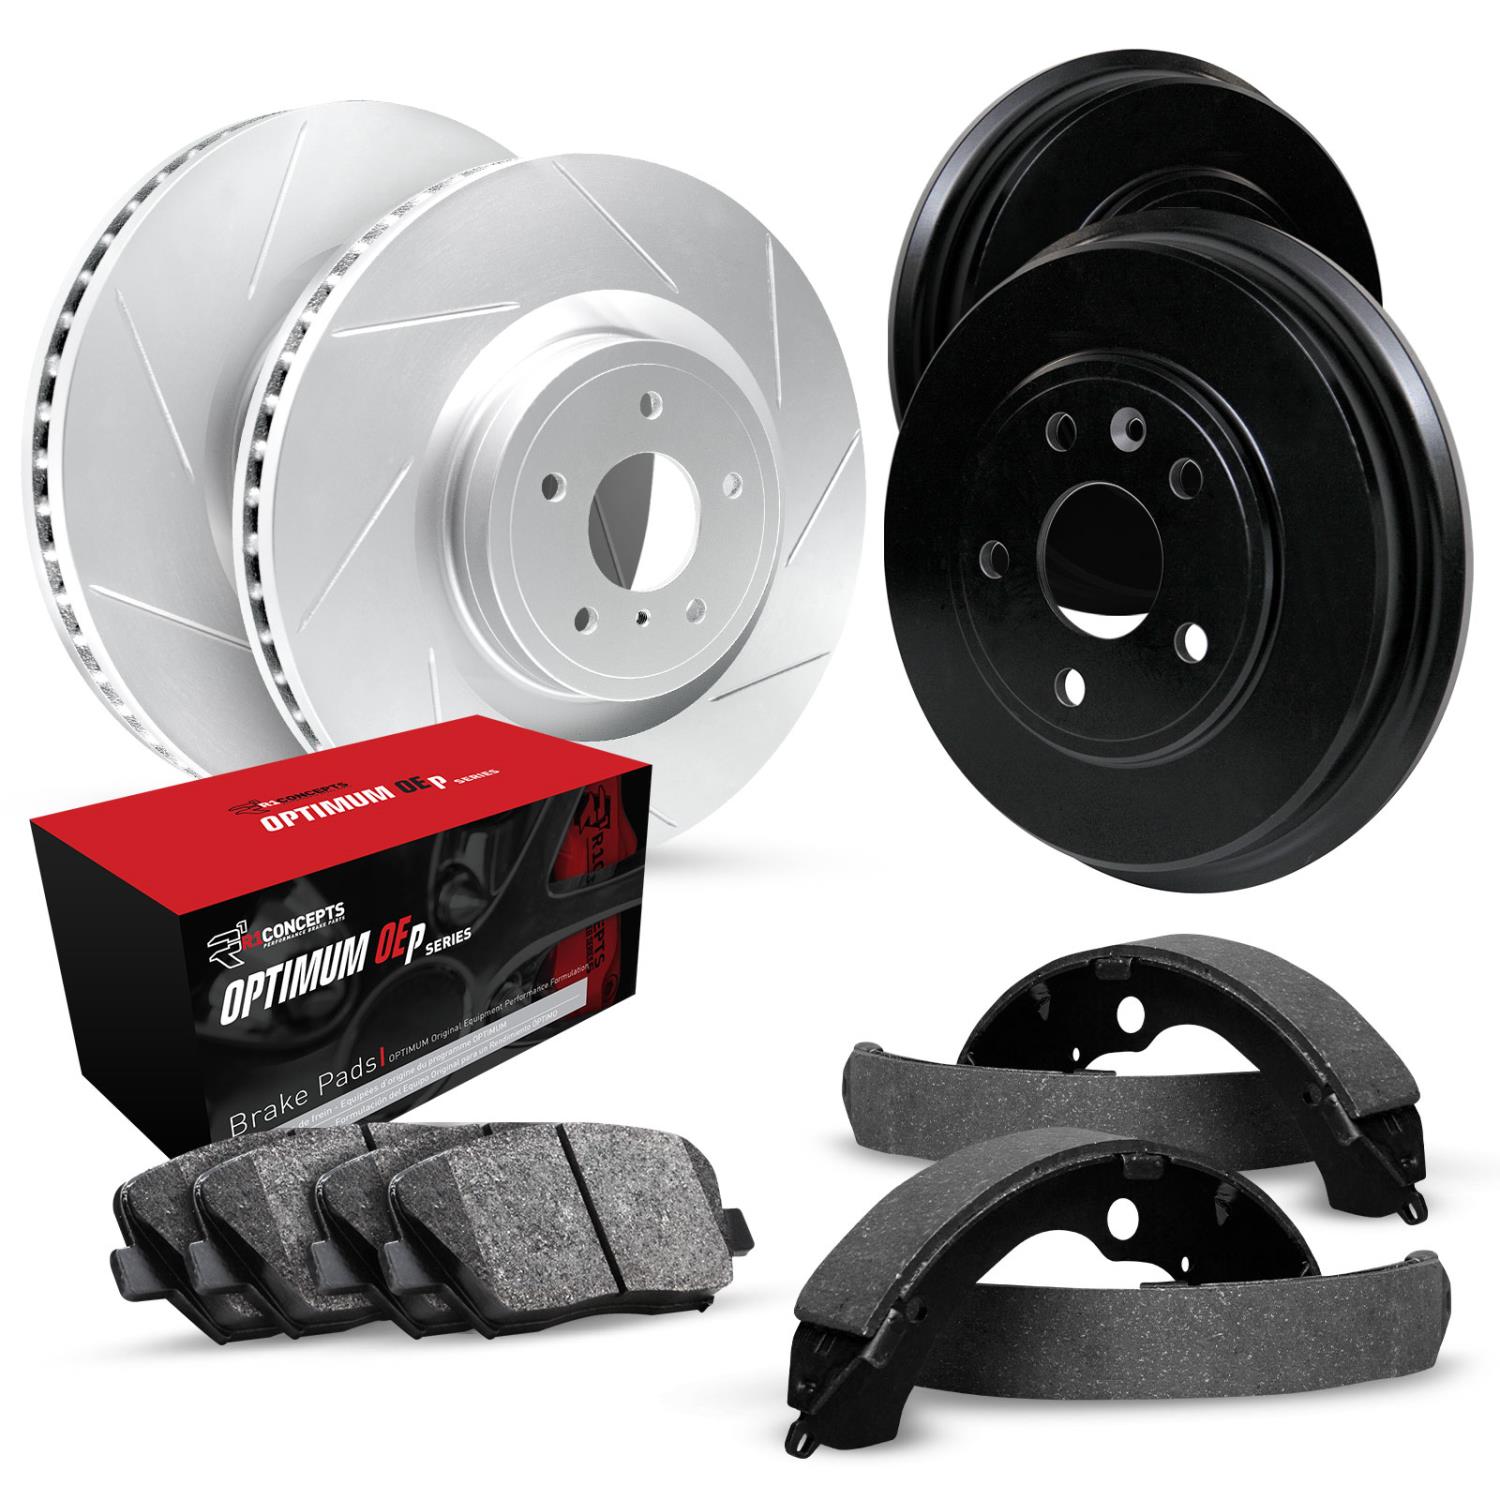 GEO-Carbon Slotted Brake Rotor & Drum Set w/Optimum OE Pads & Shoes, 1988-2000 GM, Position: Front & Rear